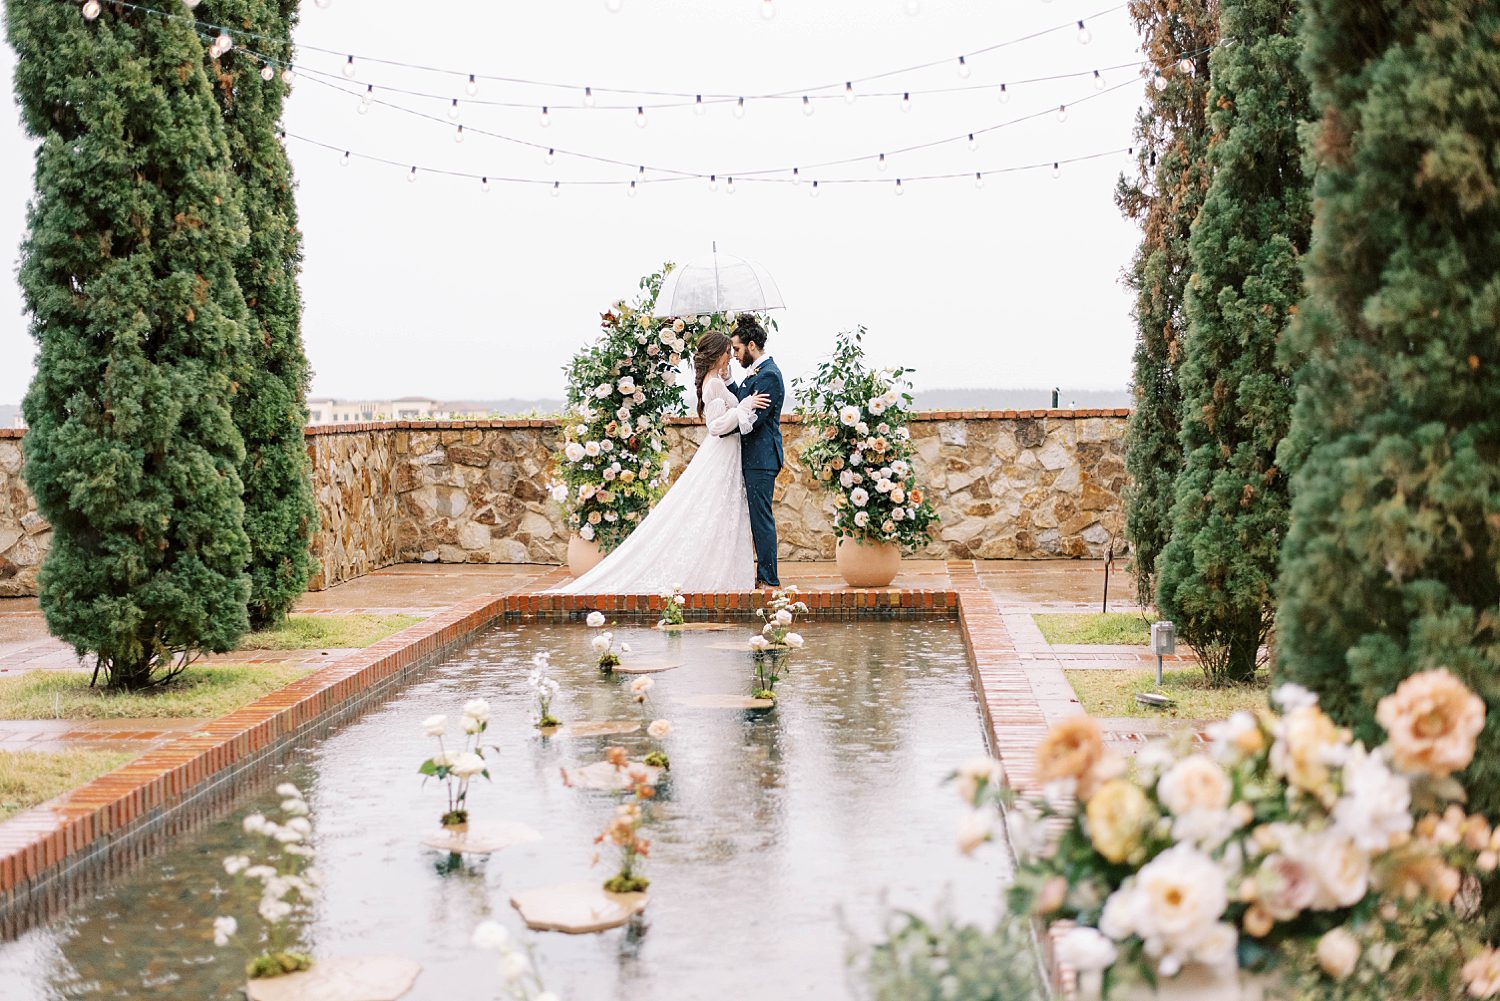 couple poses by pond at Bella Collina during rainy Florida wedding day